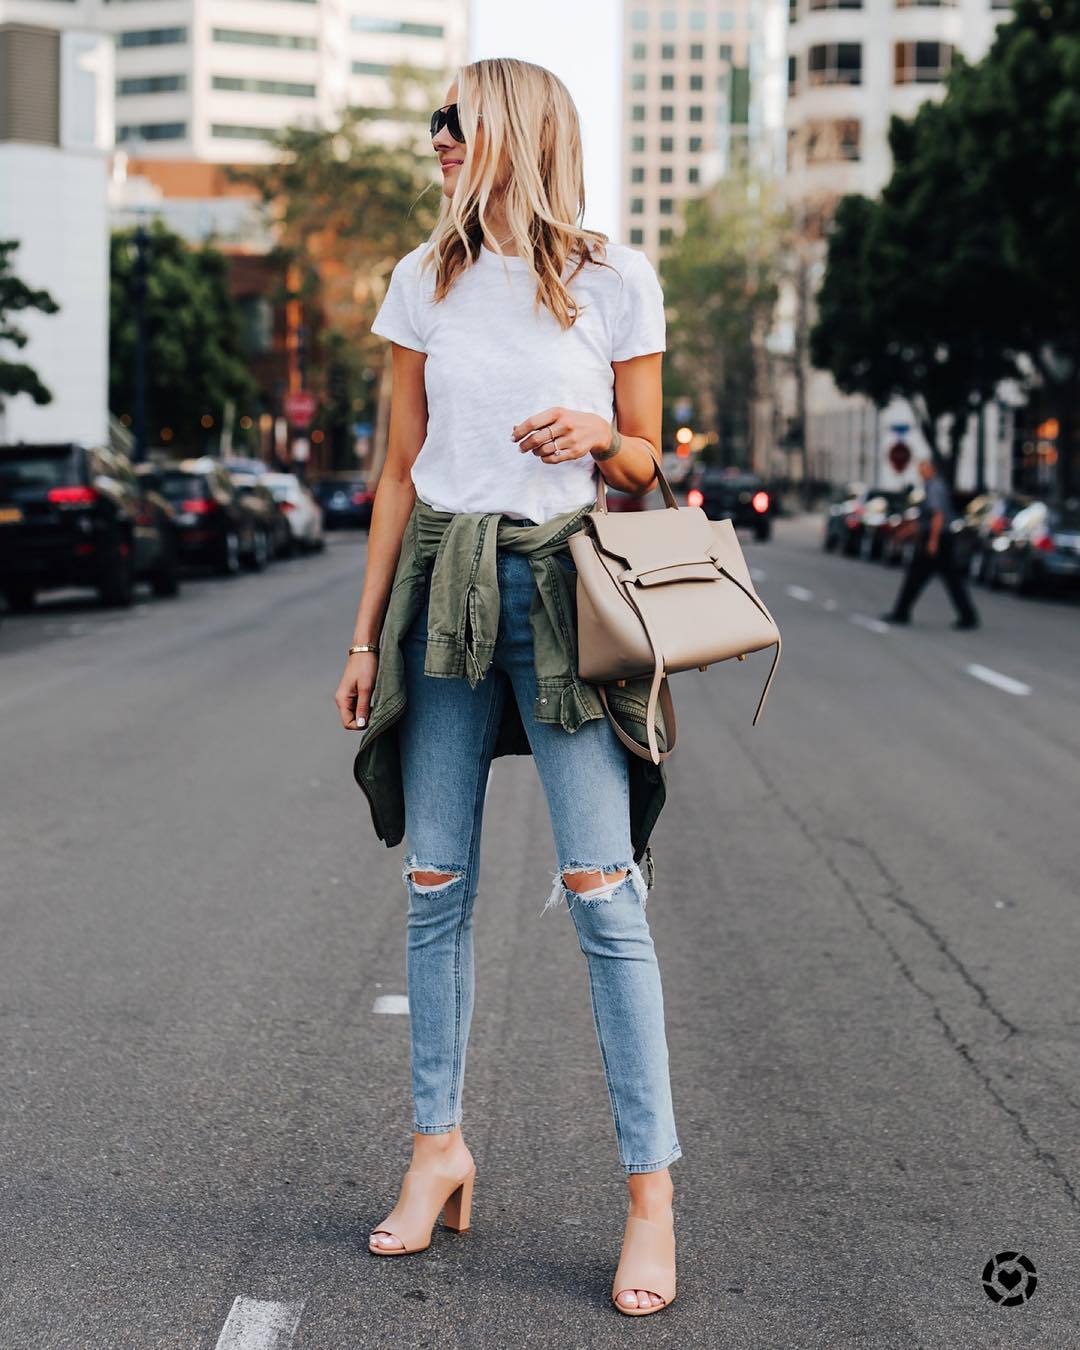 jeans, skinny jeans, ripped jeans, jacket, sandals, white t-shirt, bag ...